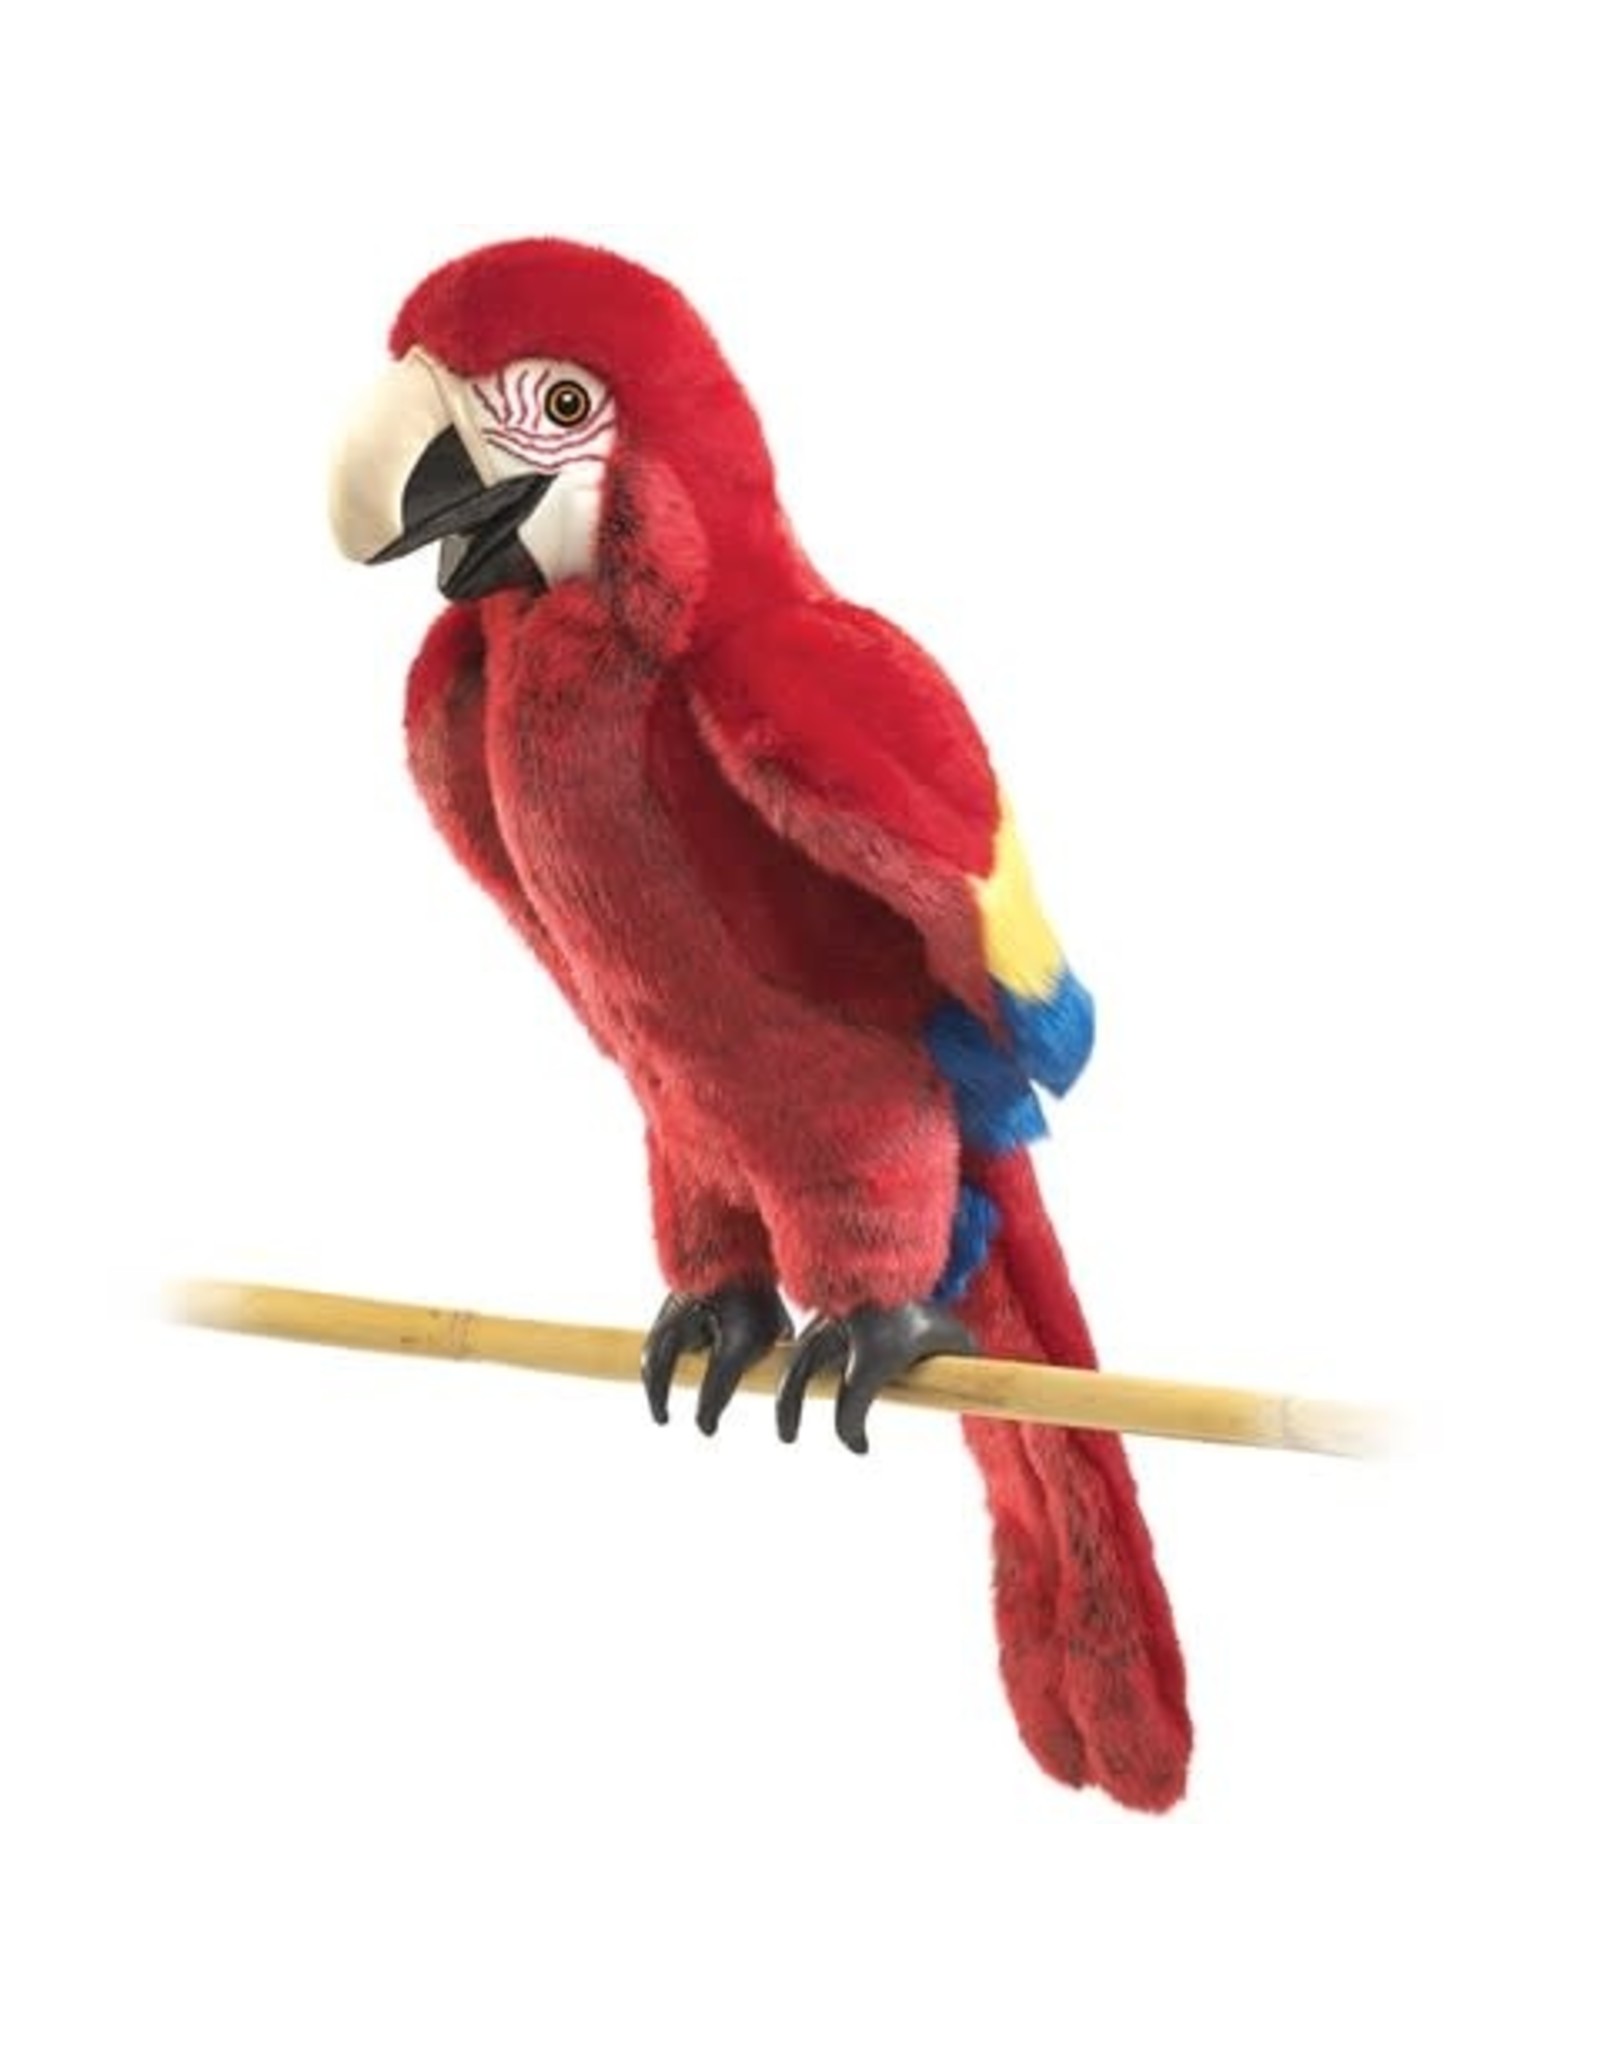 Folkmanis Scarlet Macaw Hand Puppet